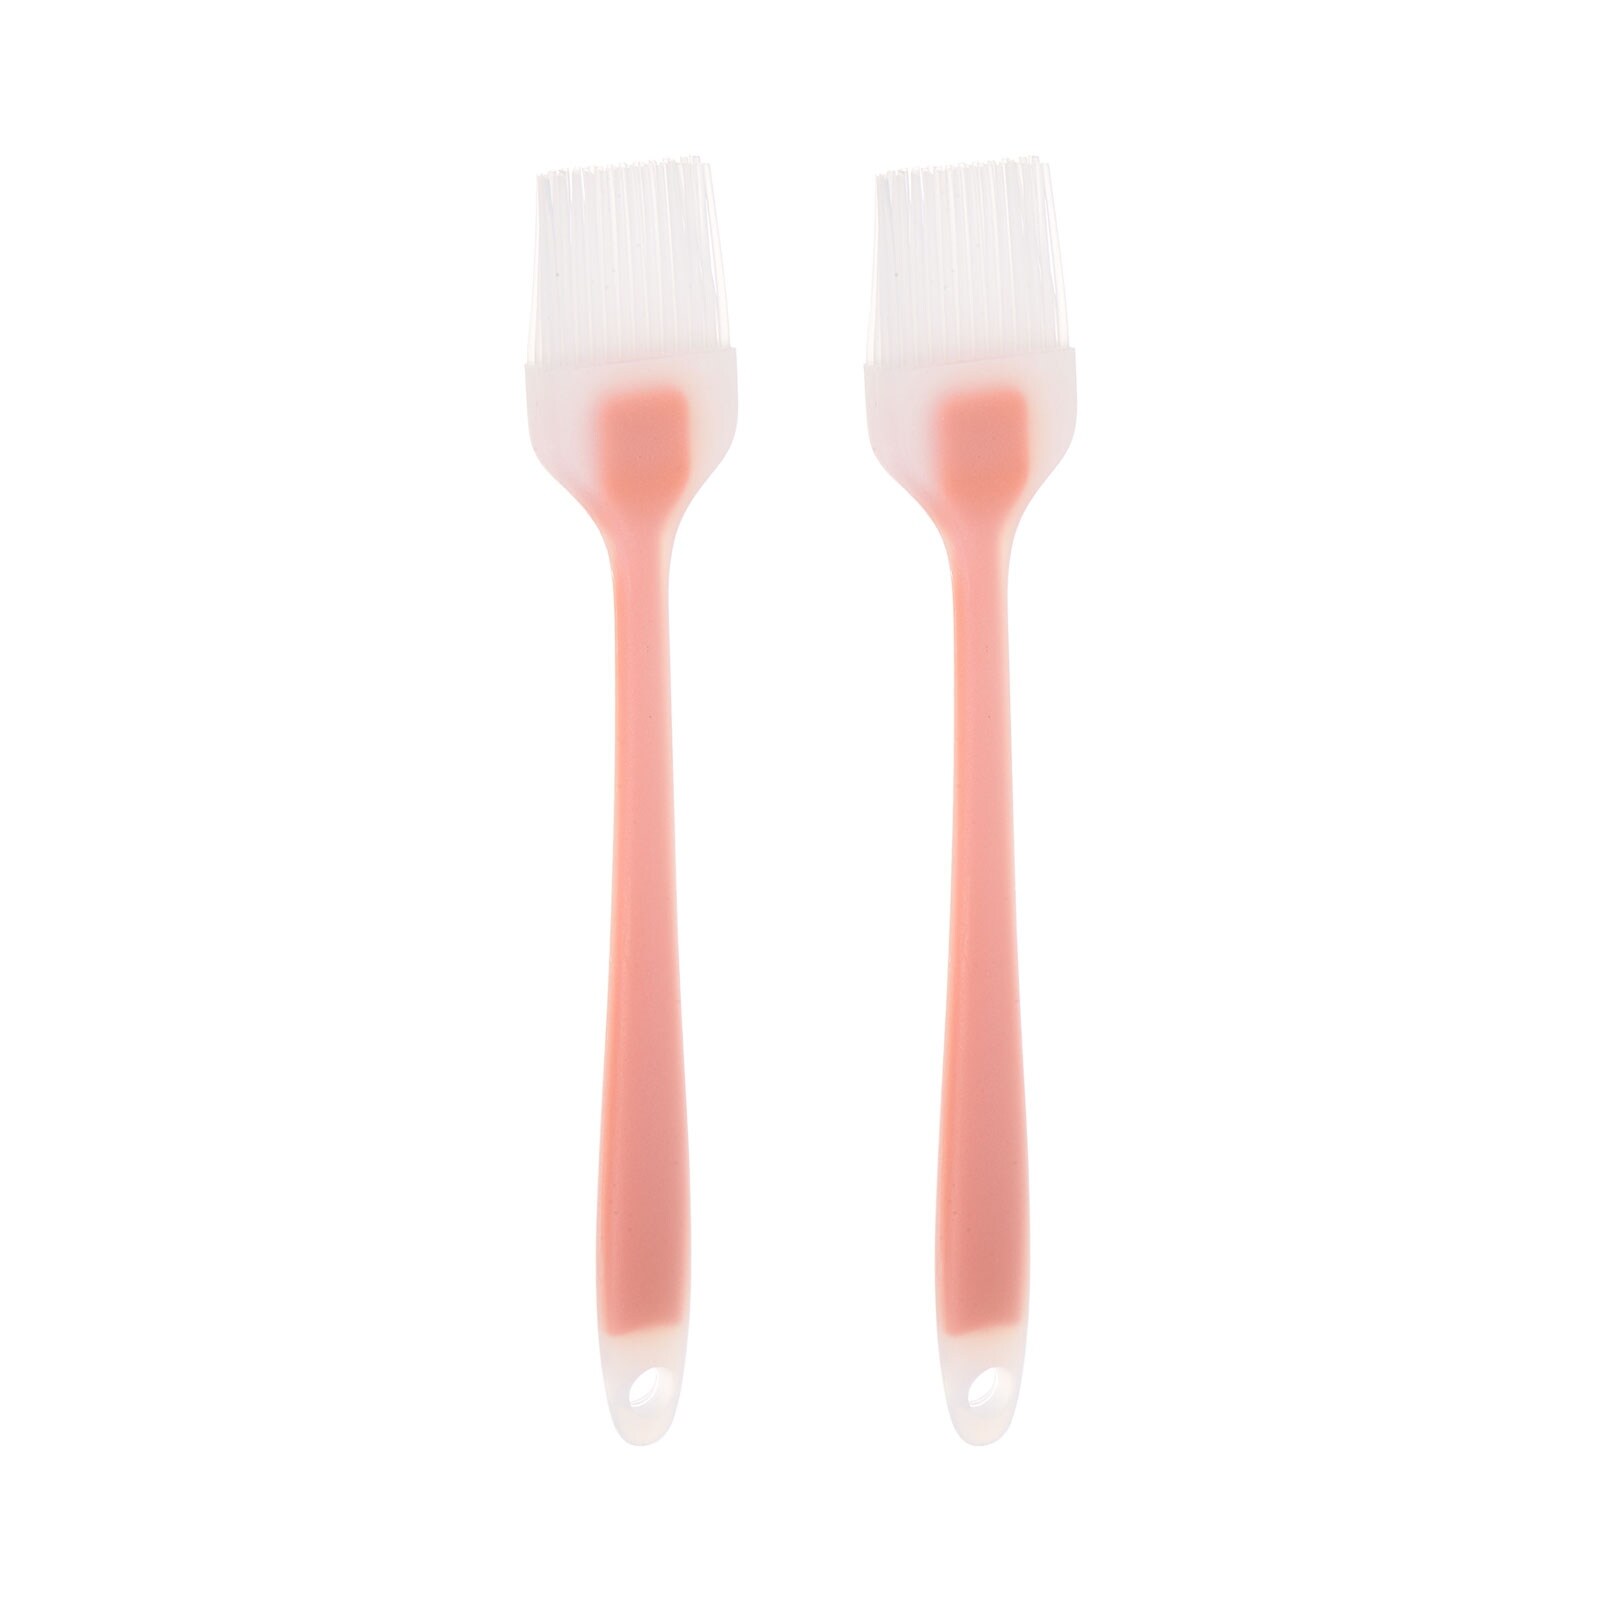 https://ak1.ostkcdn.com/images/products/is/images/direct/f15b2817a25a34e01546f78e587b0d0604bb08a2/2pcs-Silicone-Pastry-Brush%2C-1.38%22x8.07%22-Basting-Oil-for-BBQ-Baking%2C-Orange.jpg